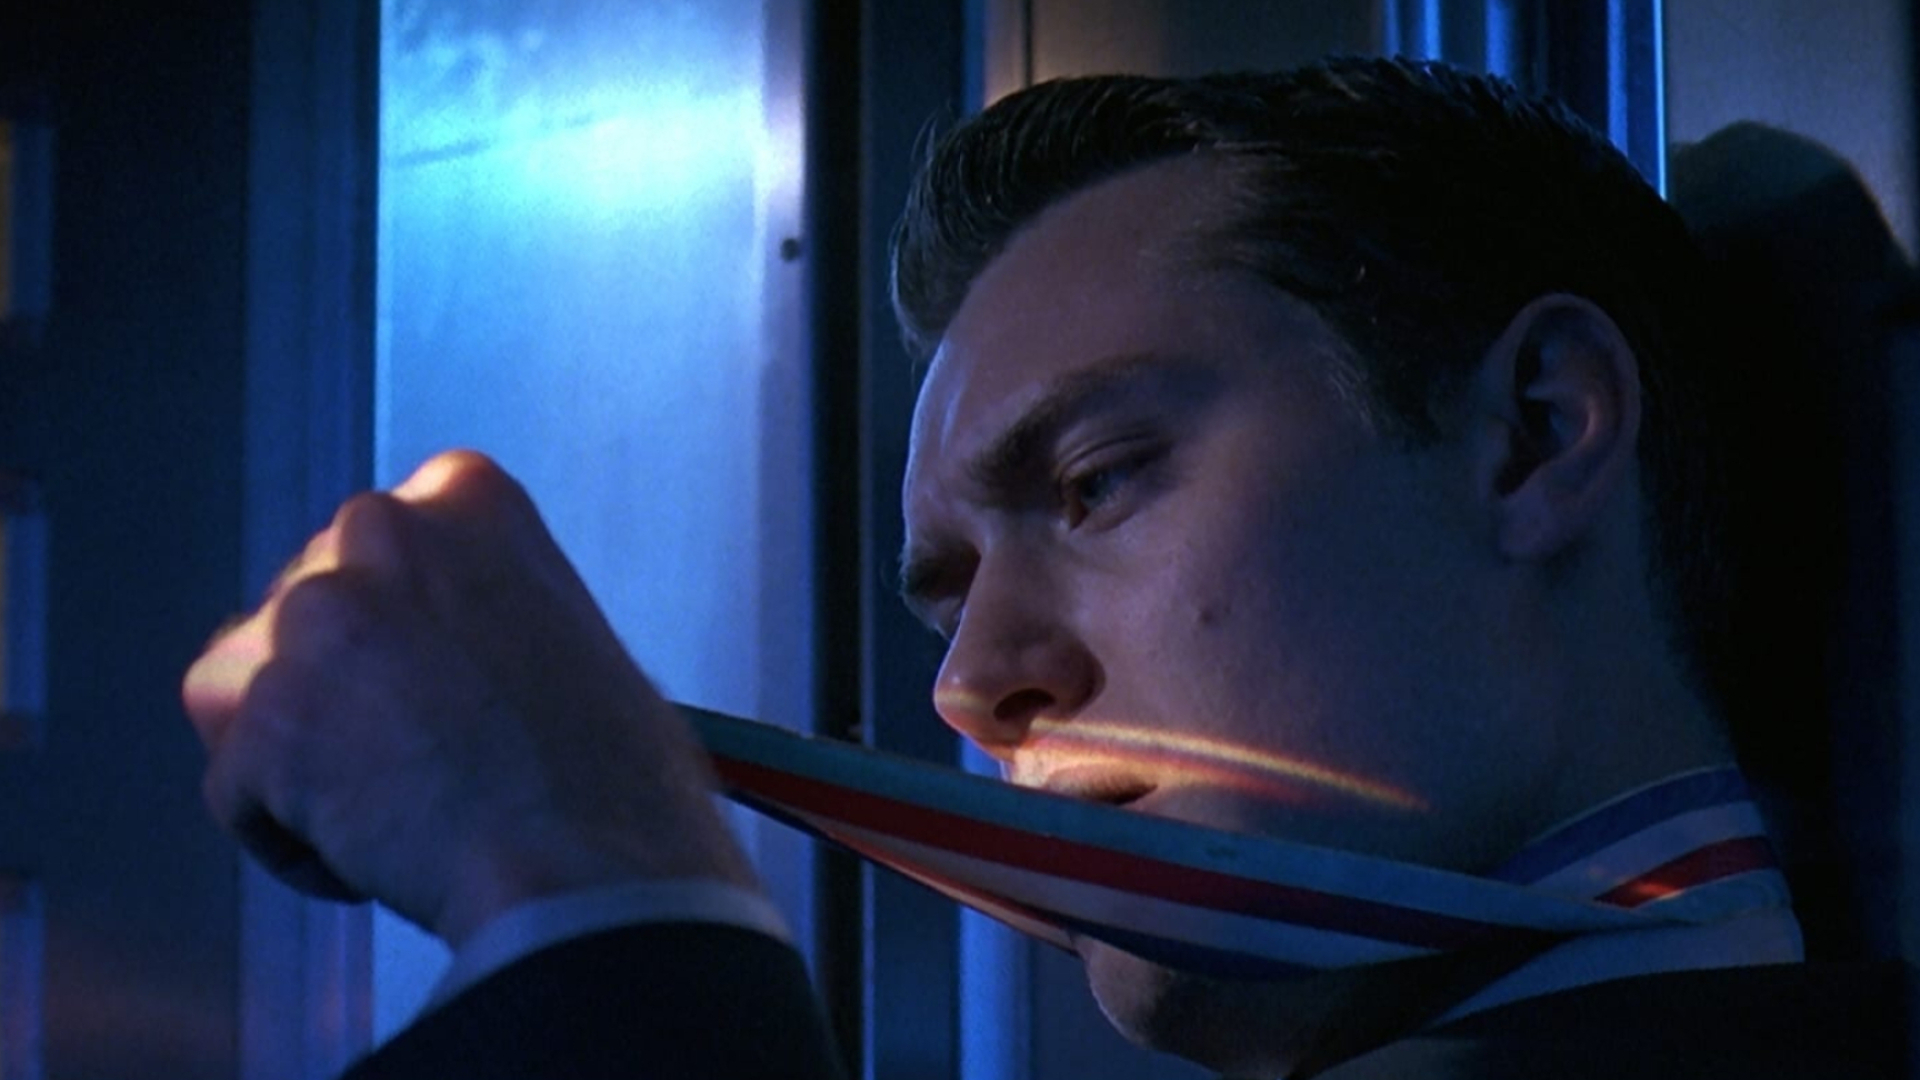 Gattaca: The film ended its theatrical run with a domestic total of $12.5 million. 1920x1080 Full HD Background.